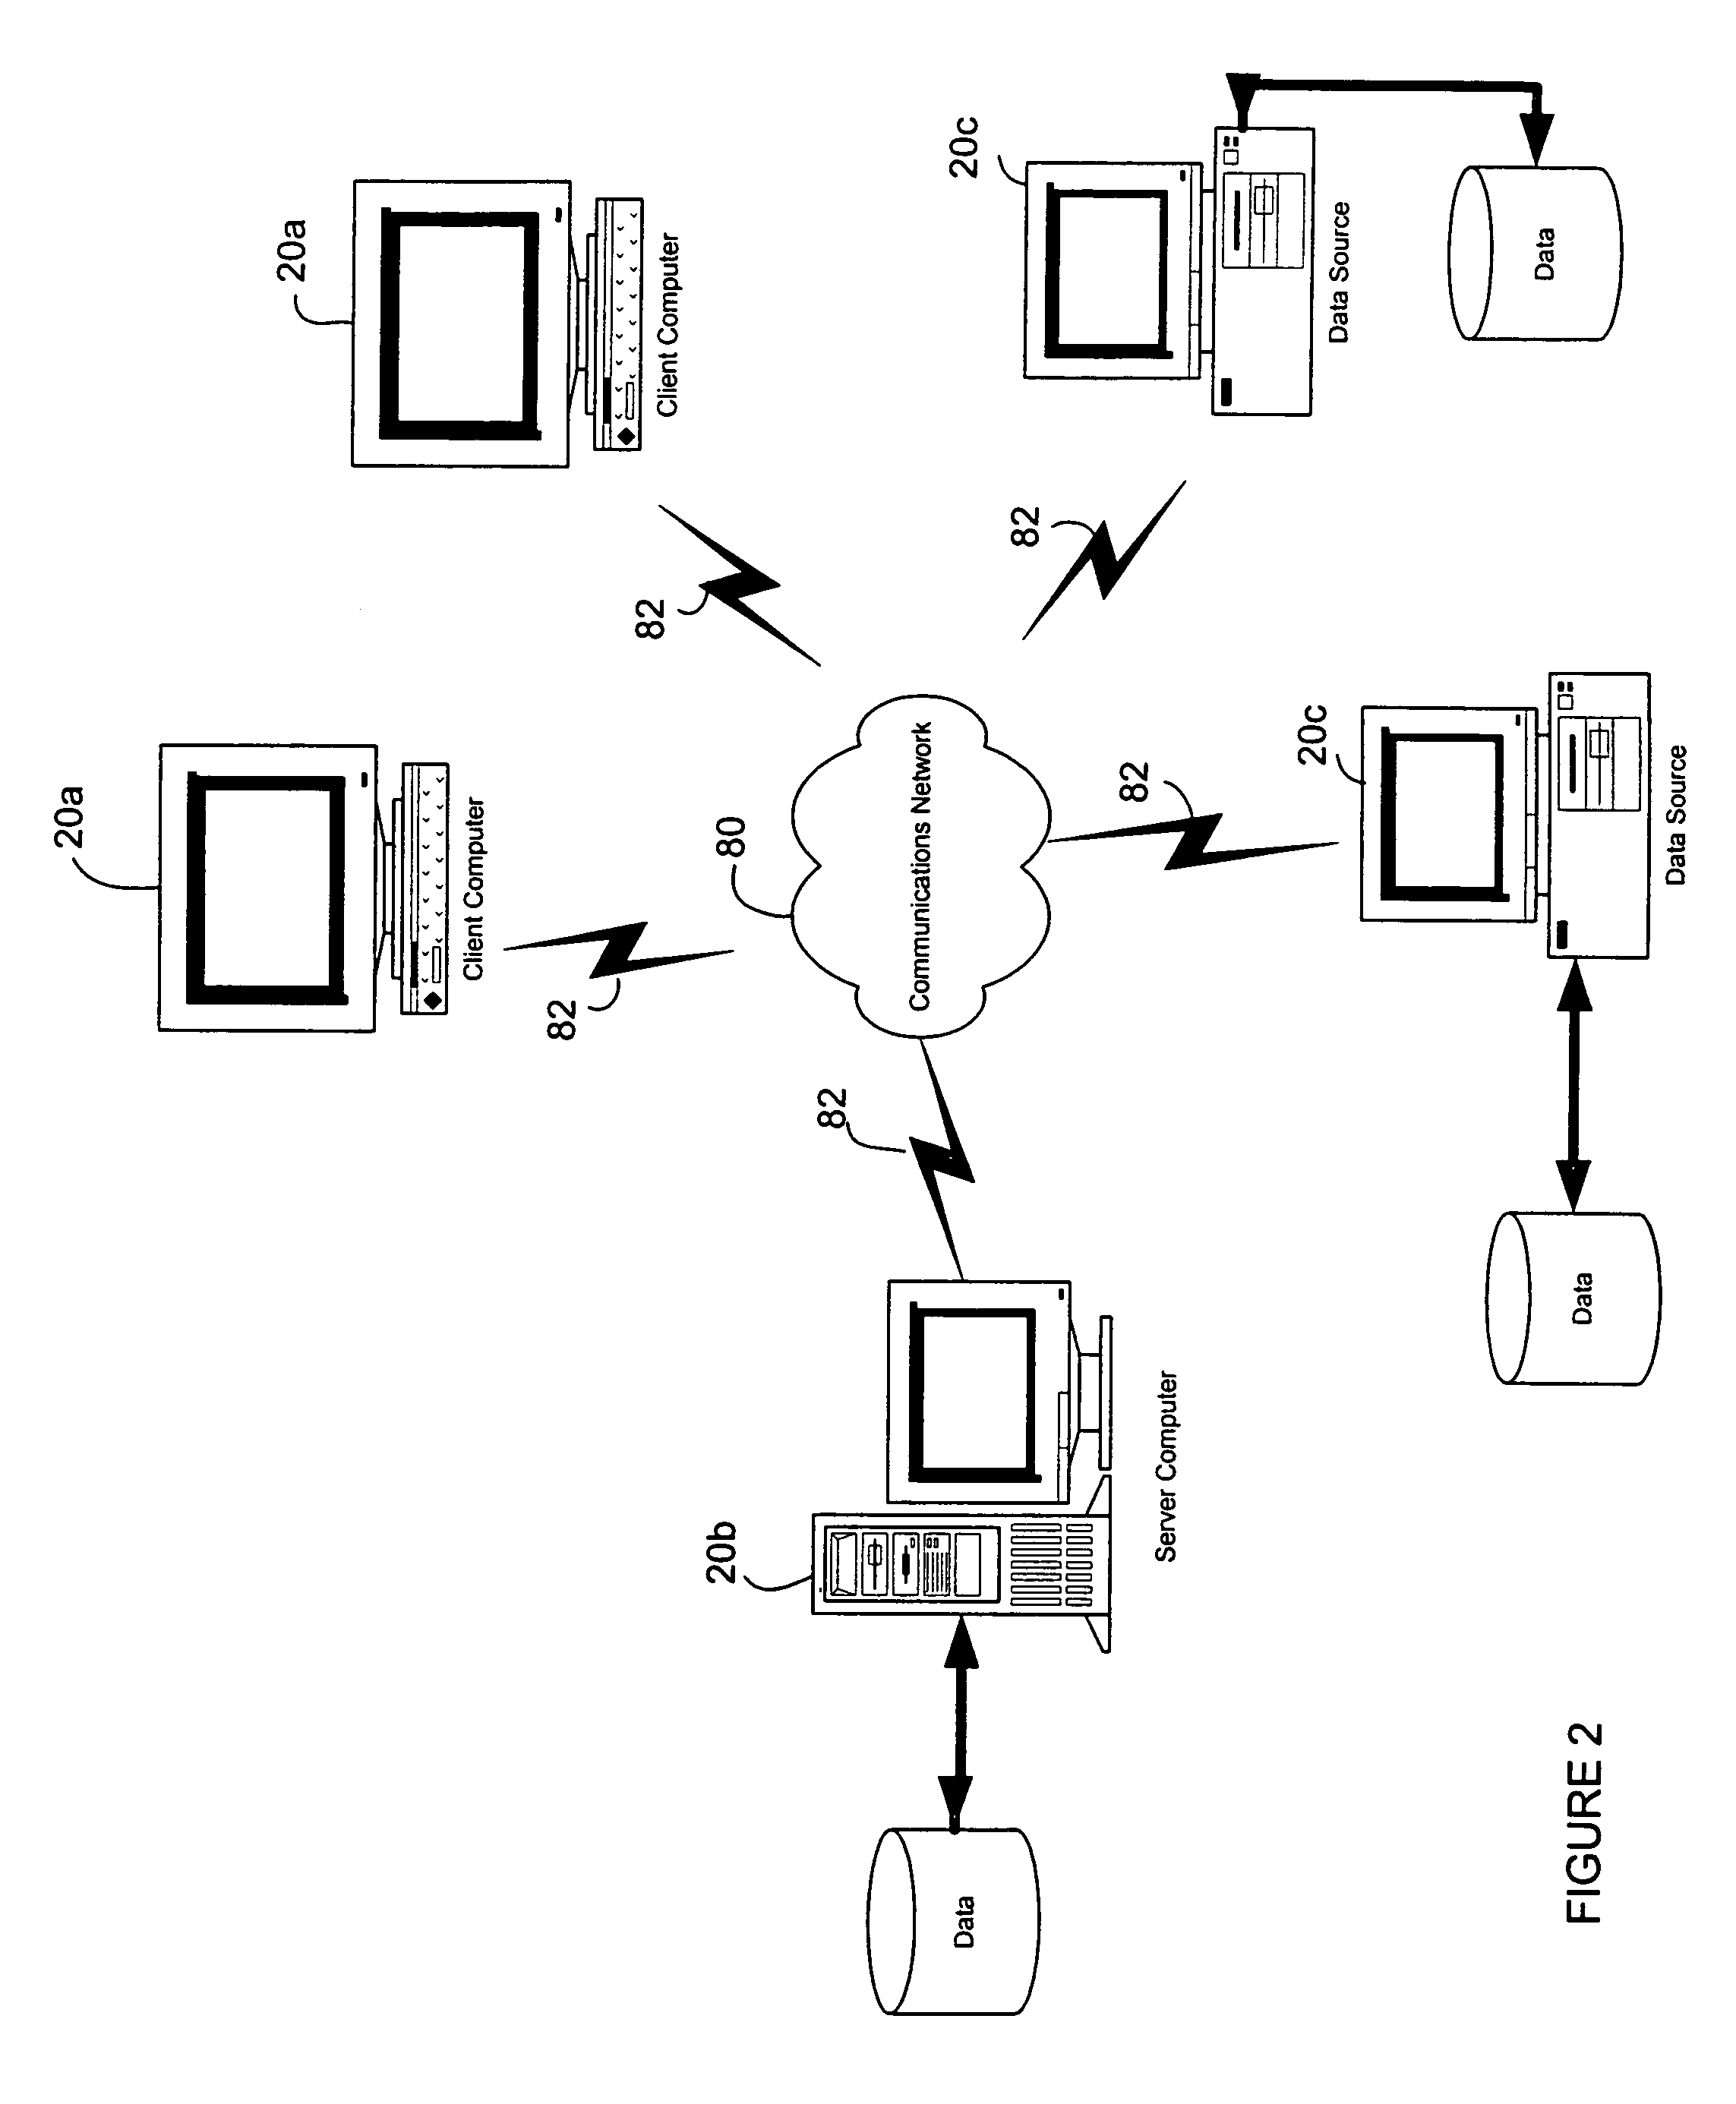 System and method for document isolation